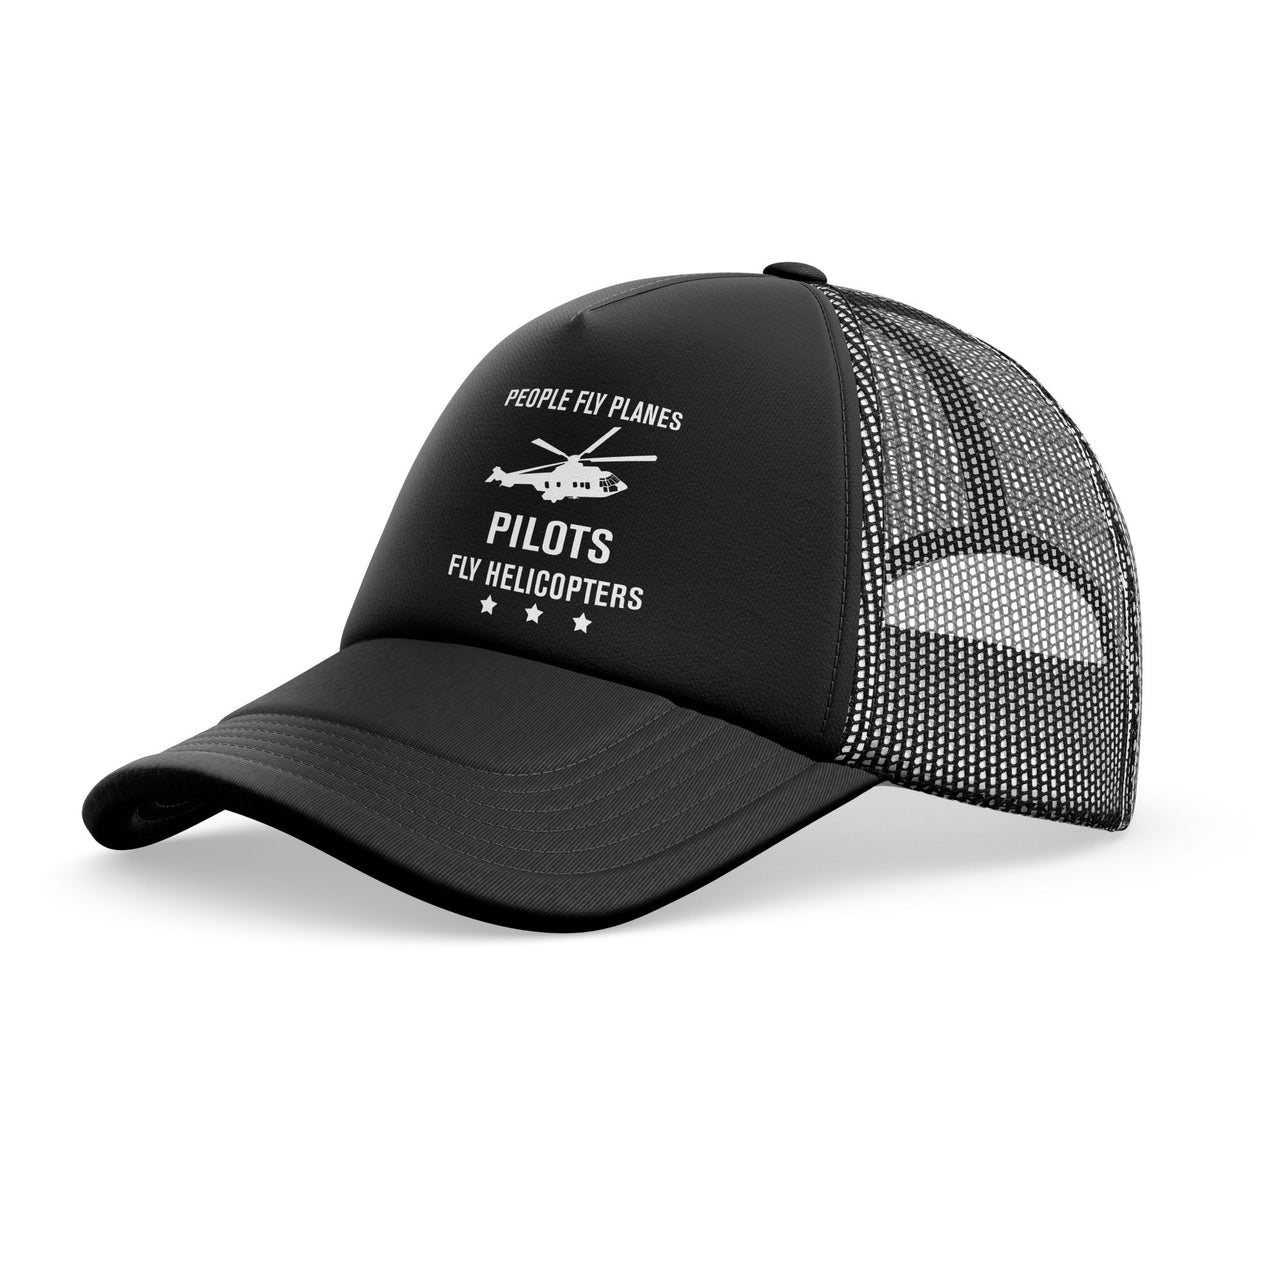 People Fly Planes Pilots Fly Helicopters Designed Trucker Caps & Hats